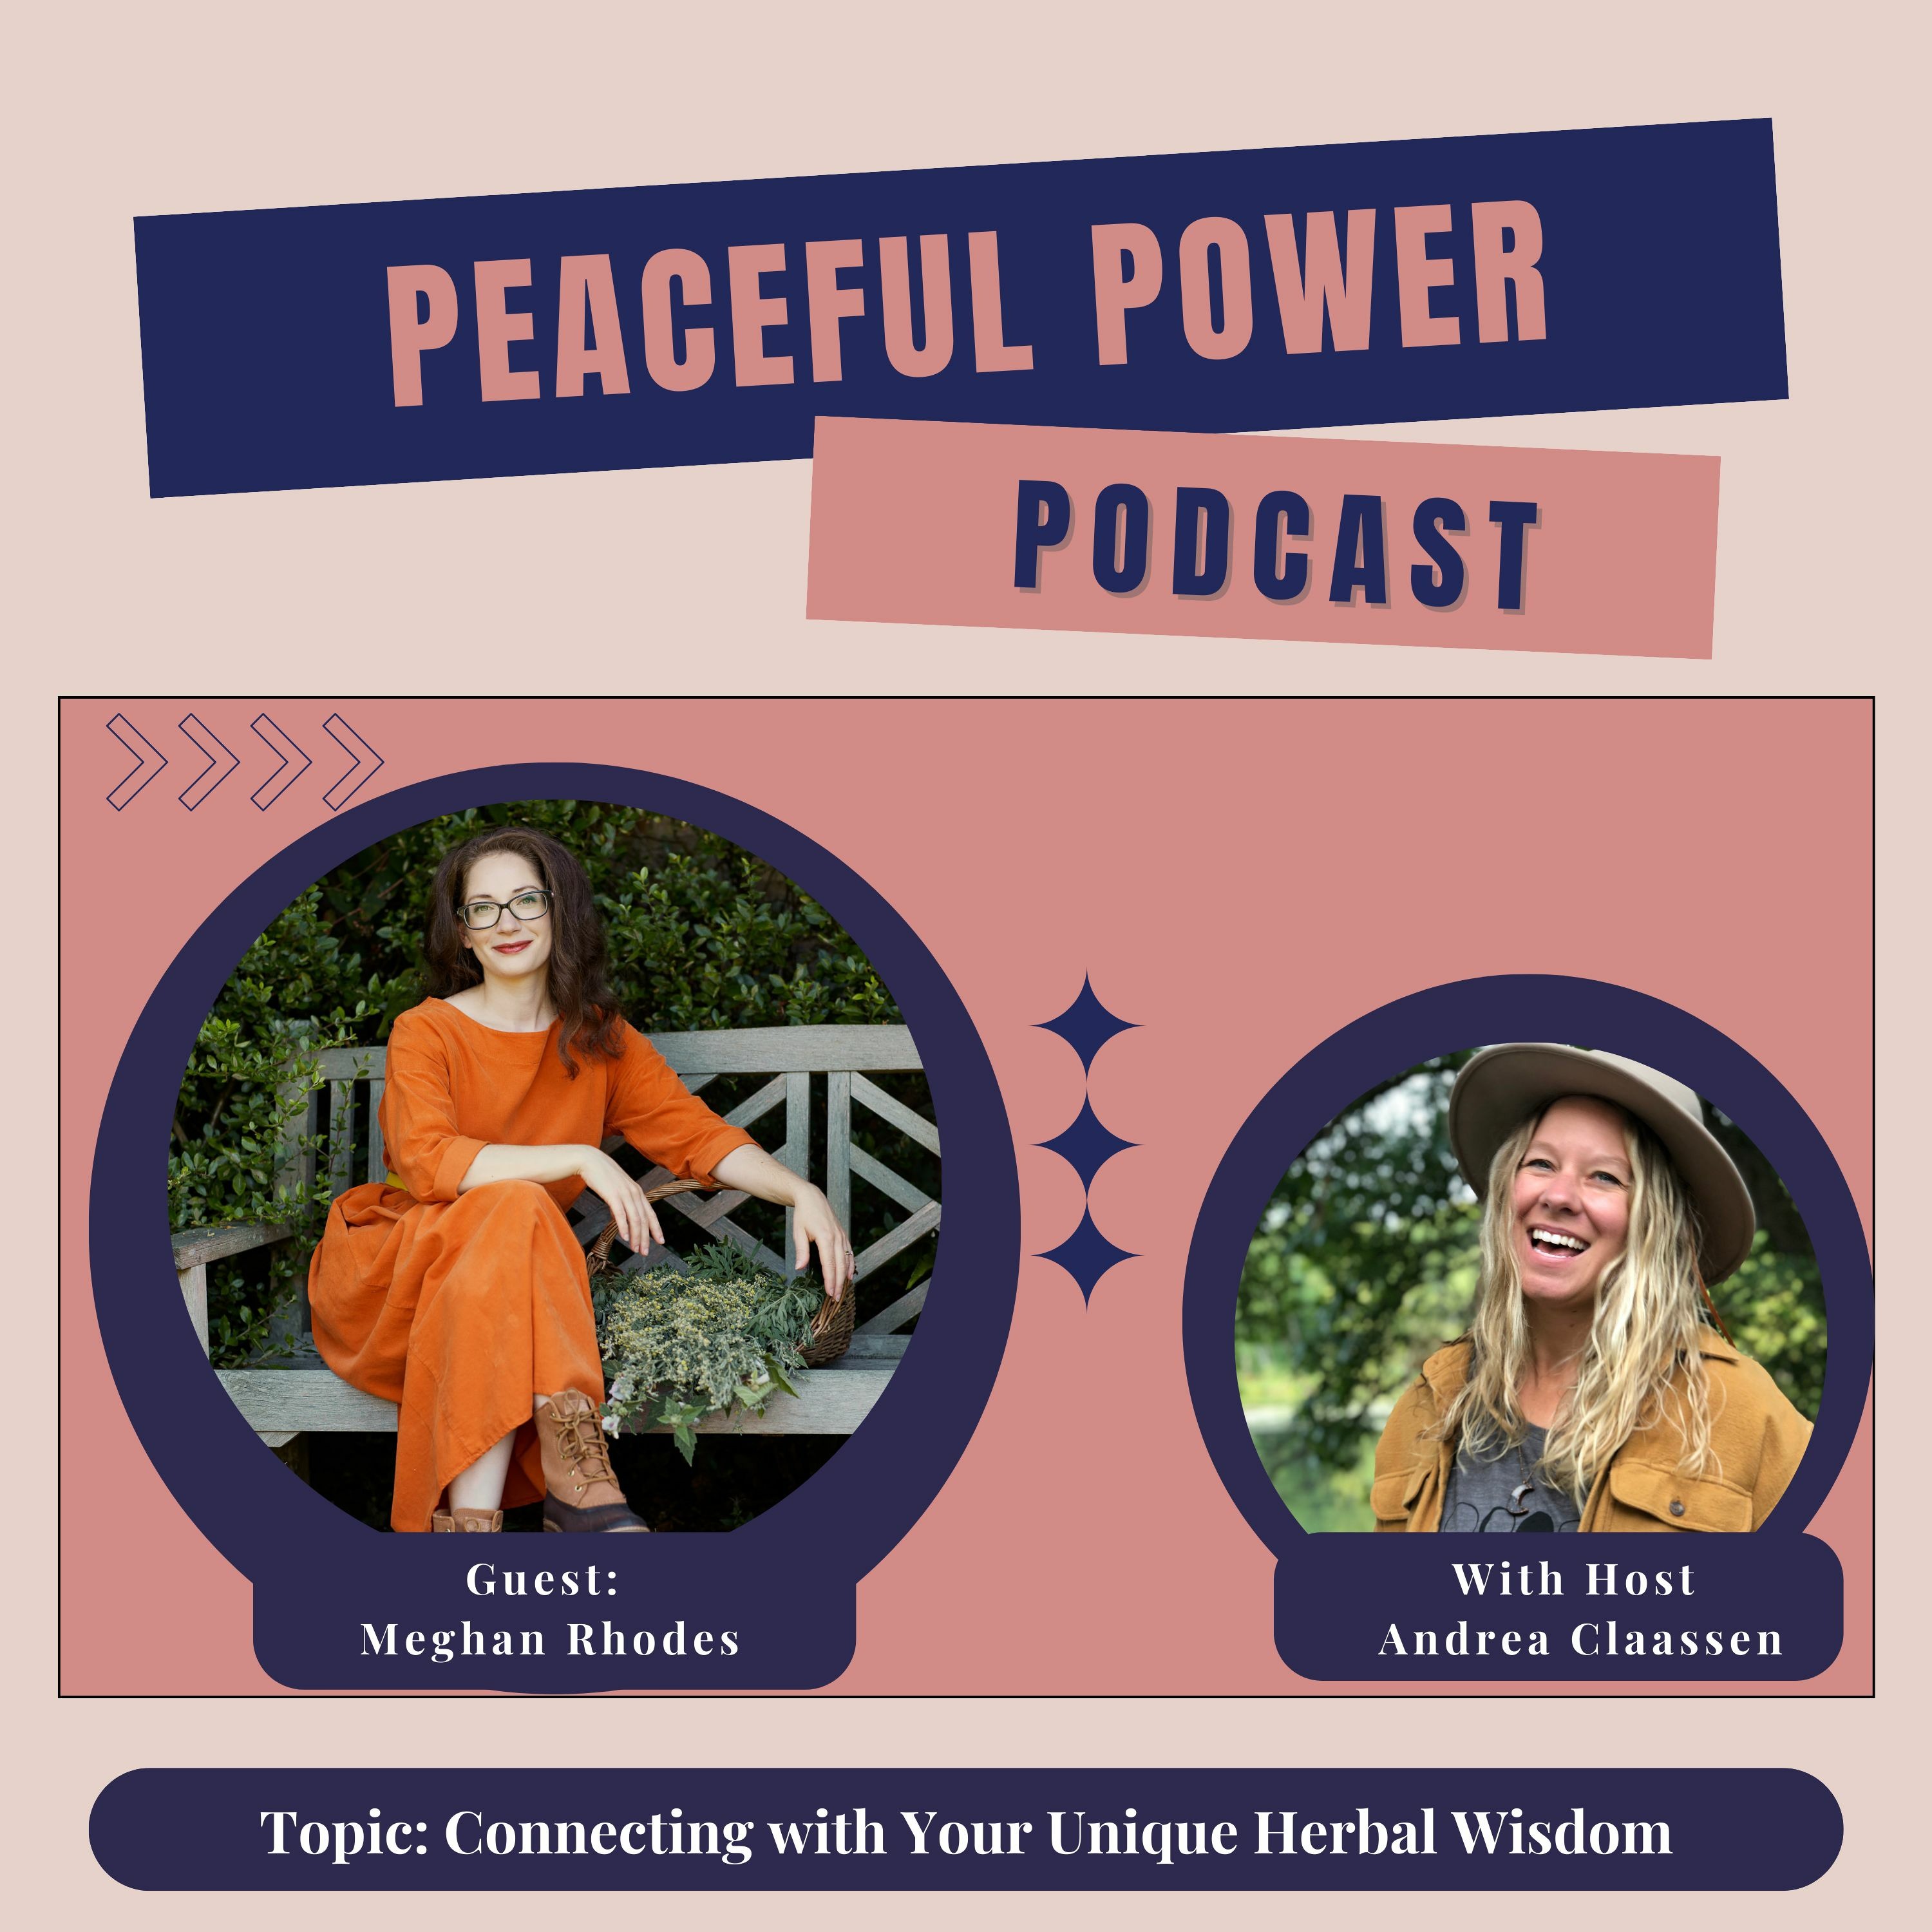 Meghan Rhodes on Connecting with Your Unique Herbal Wisdom